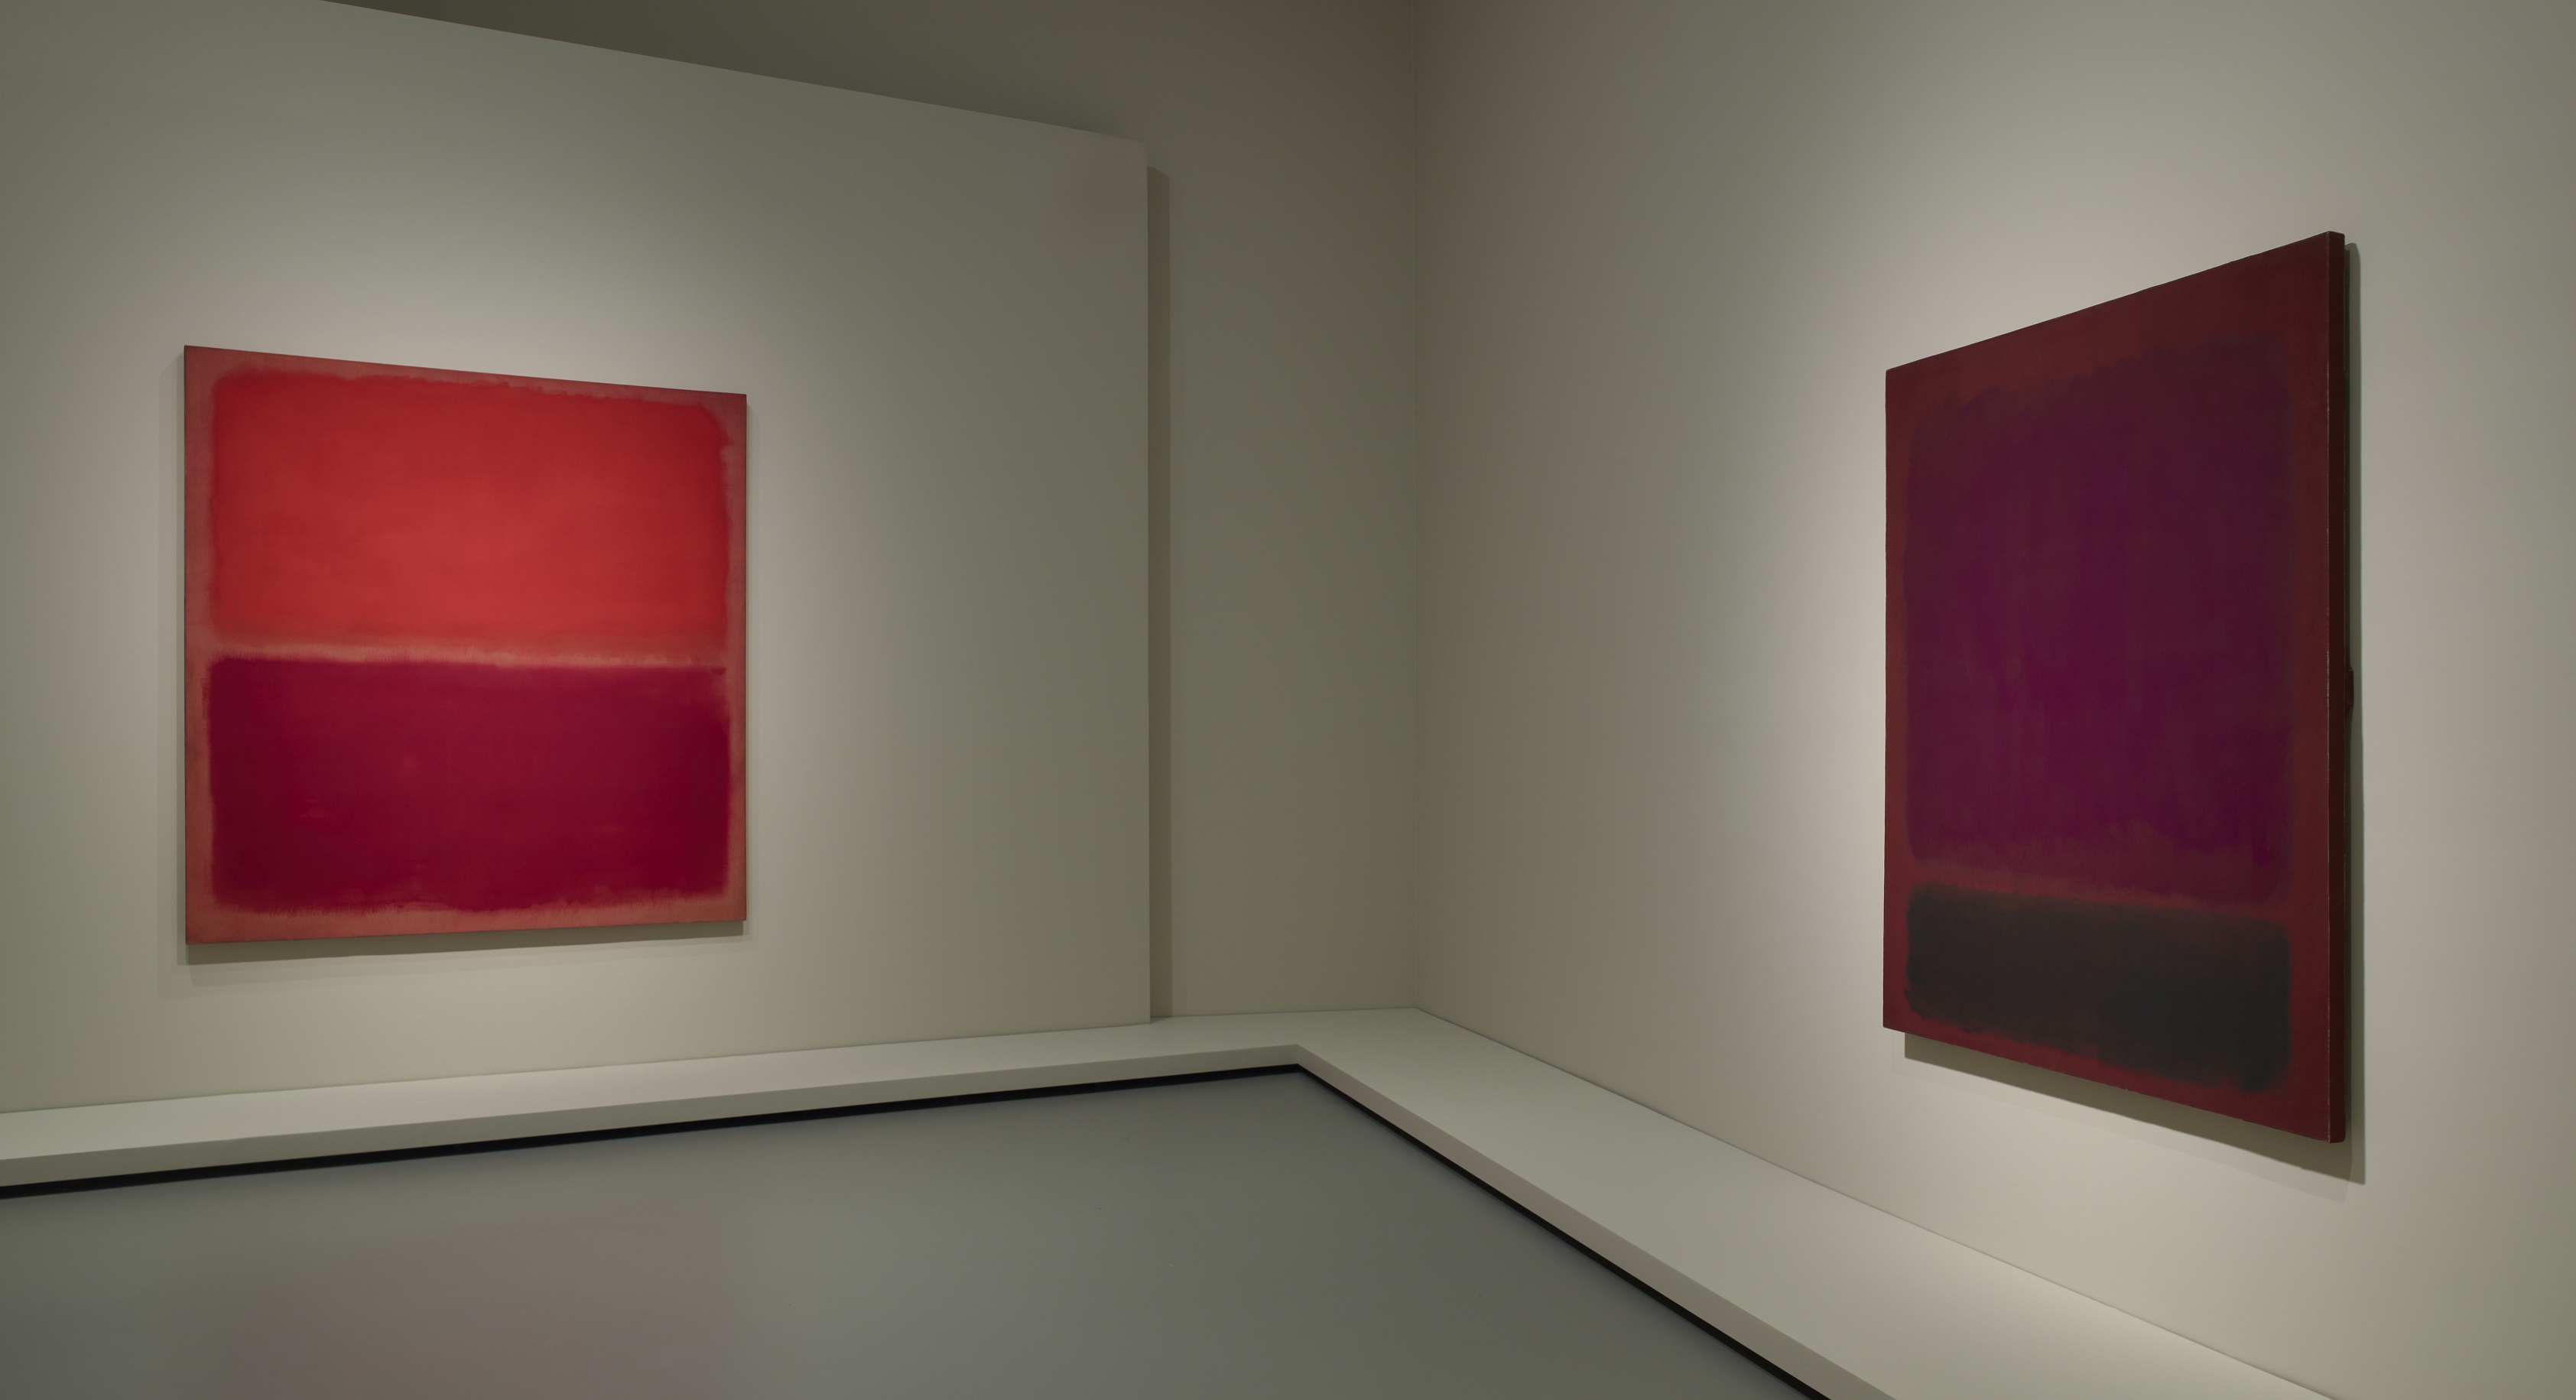 The Louis Vuitton Foundation presents its new Mark Rothko